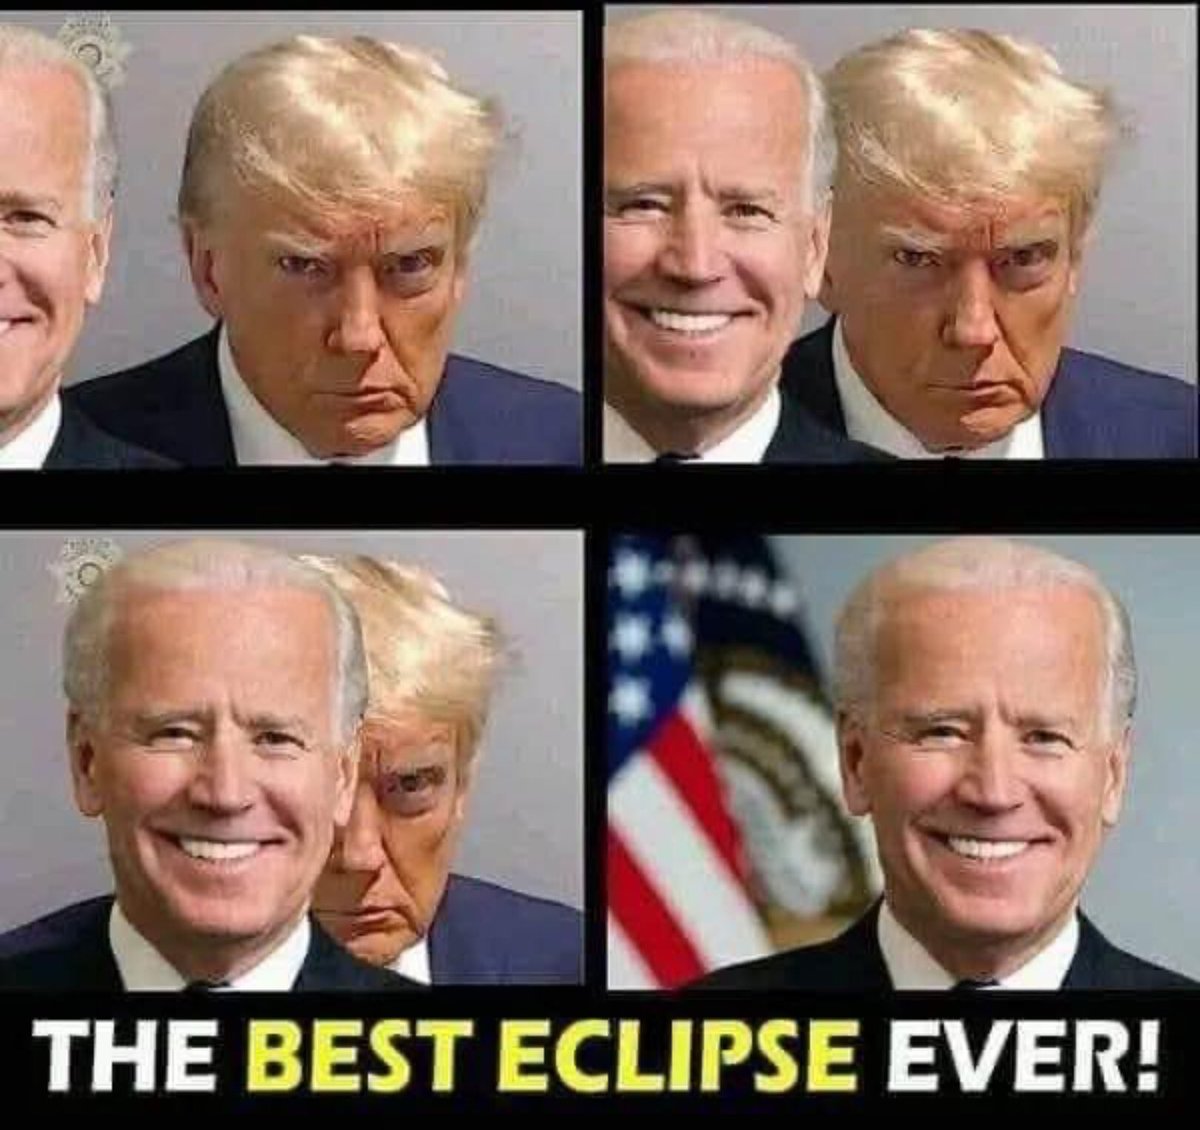 The Best eclipse ever!